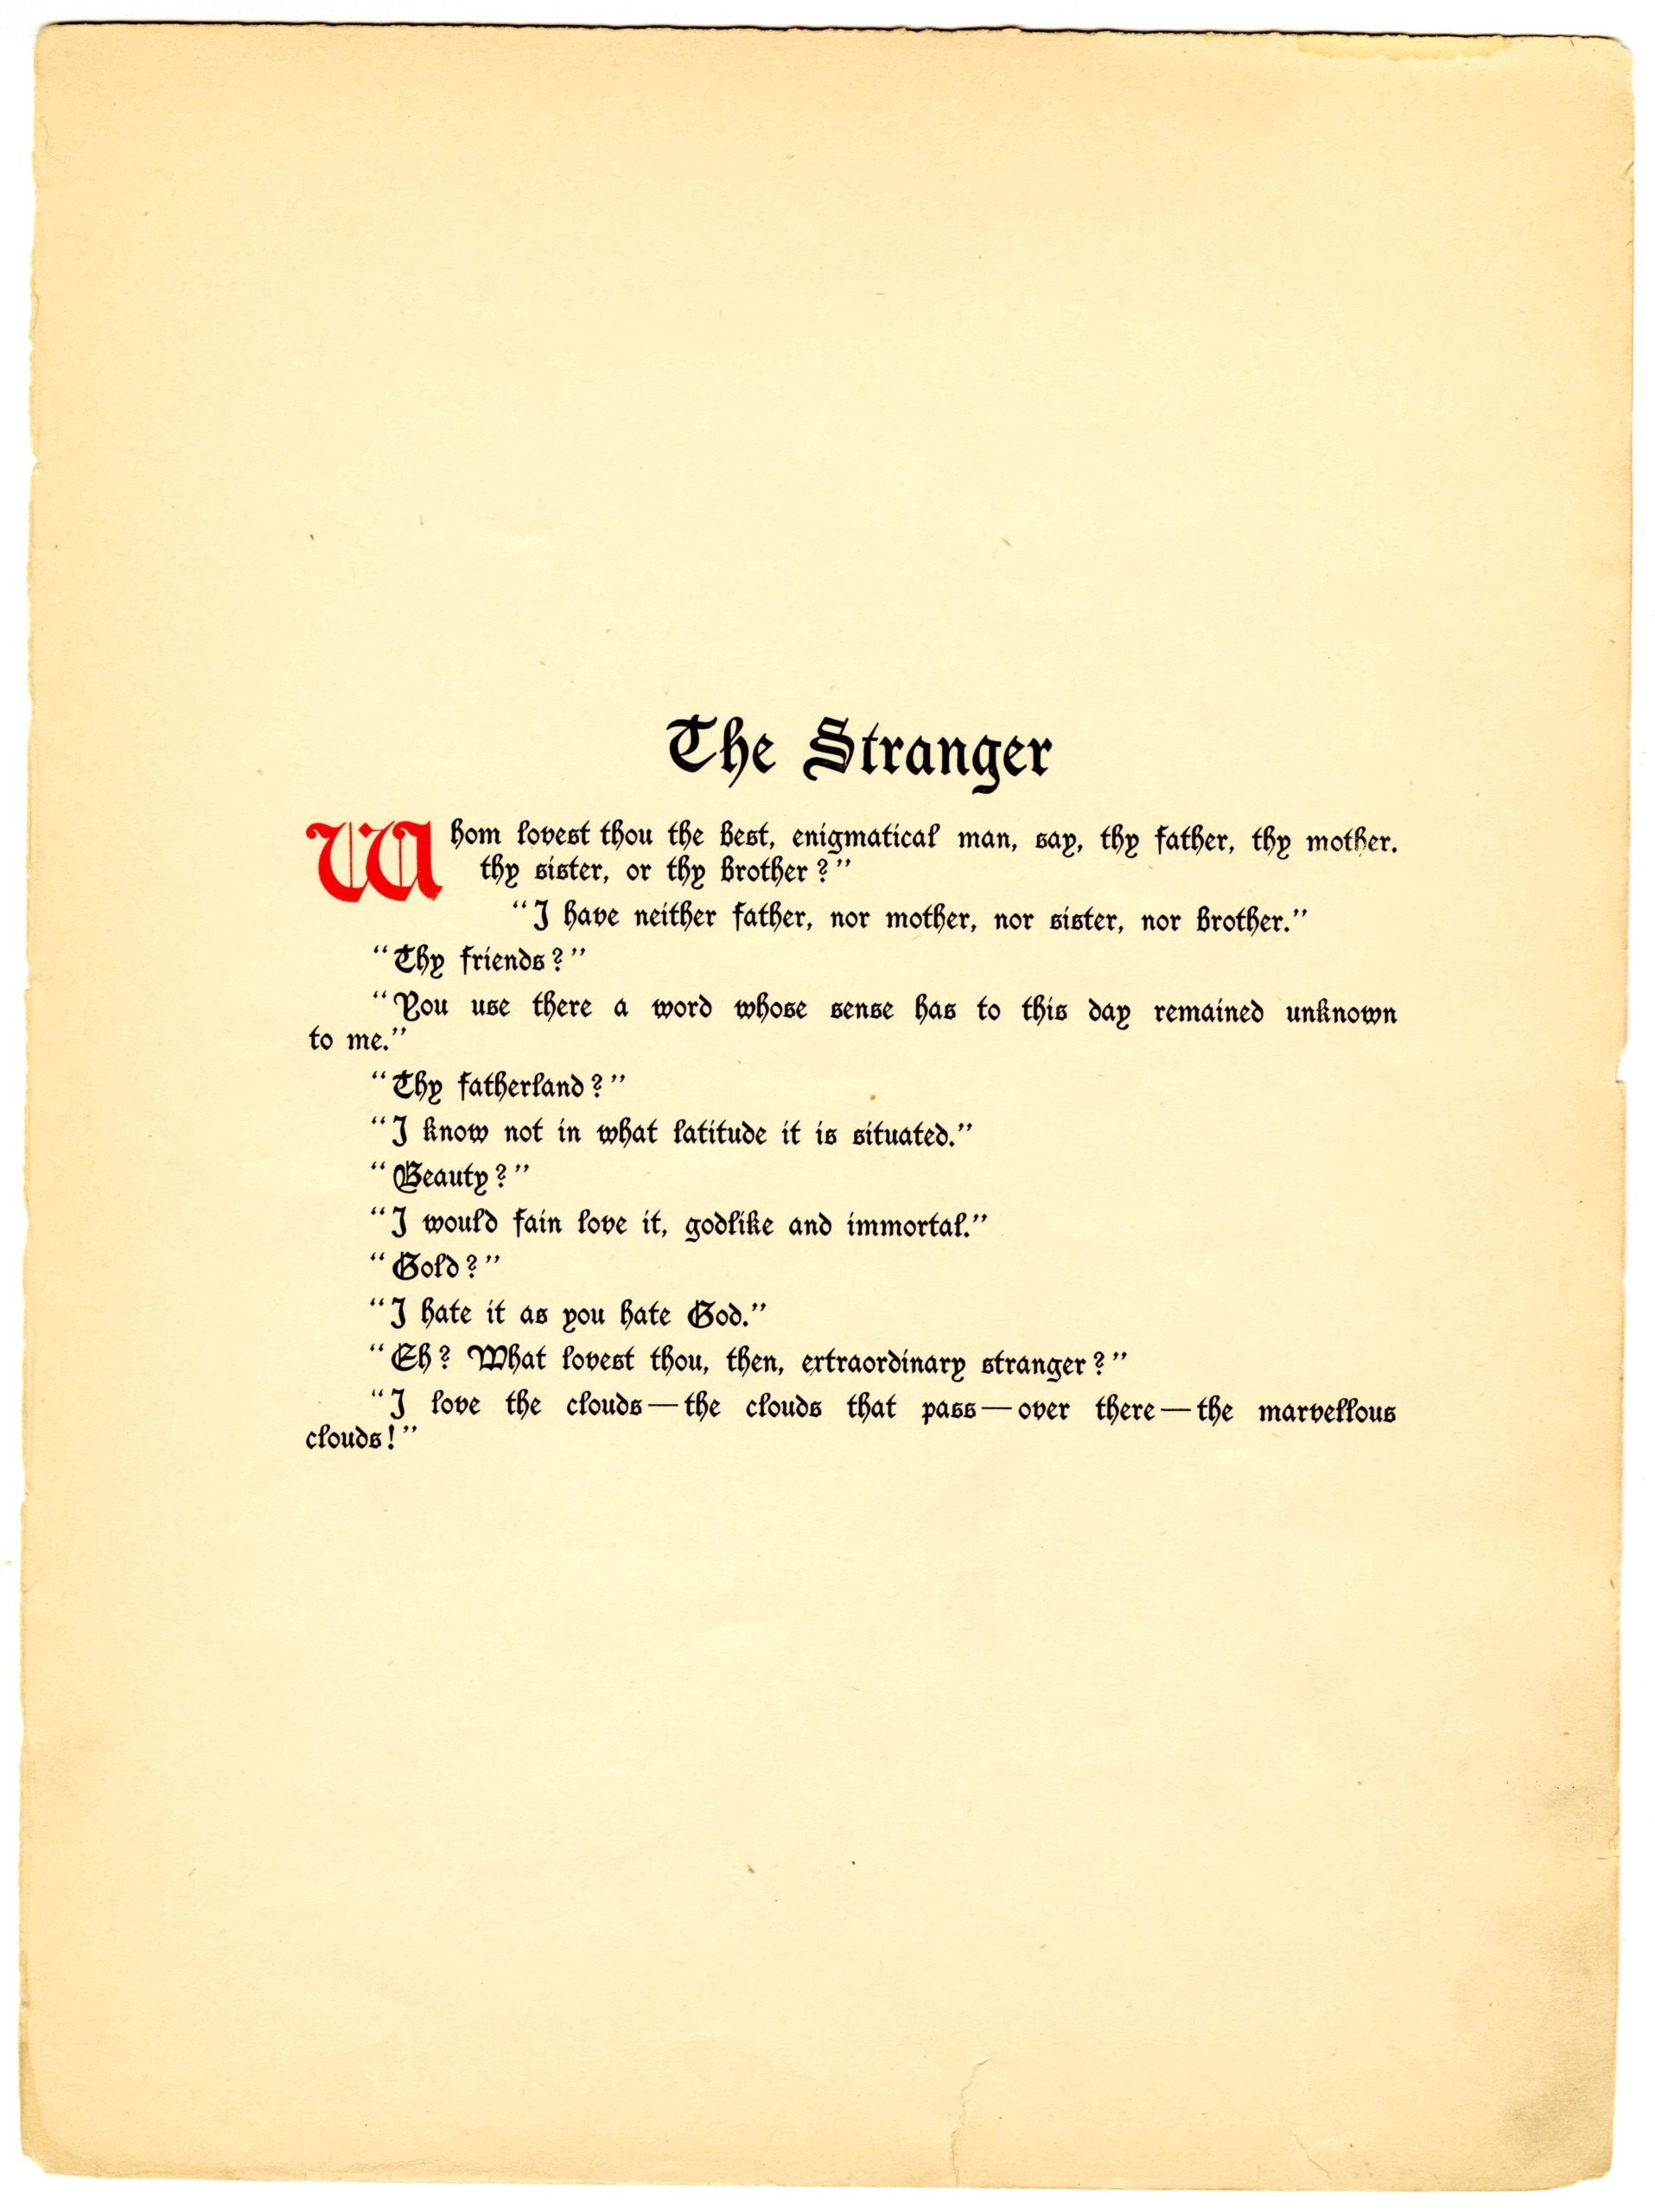 Text of The Stranger, poem by Baudelaire, from Tone Pictures score.